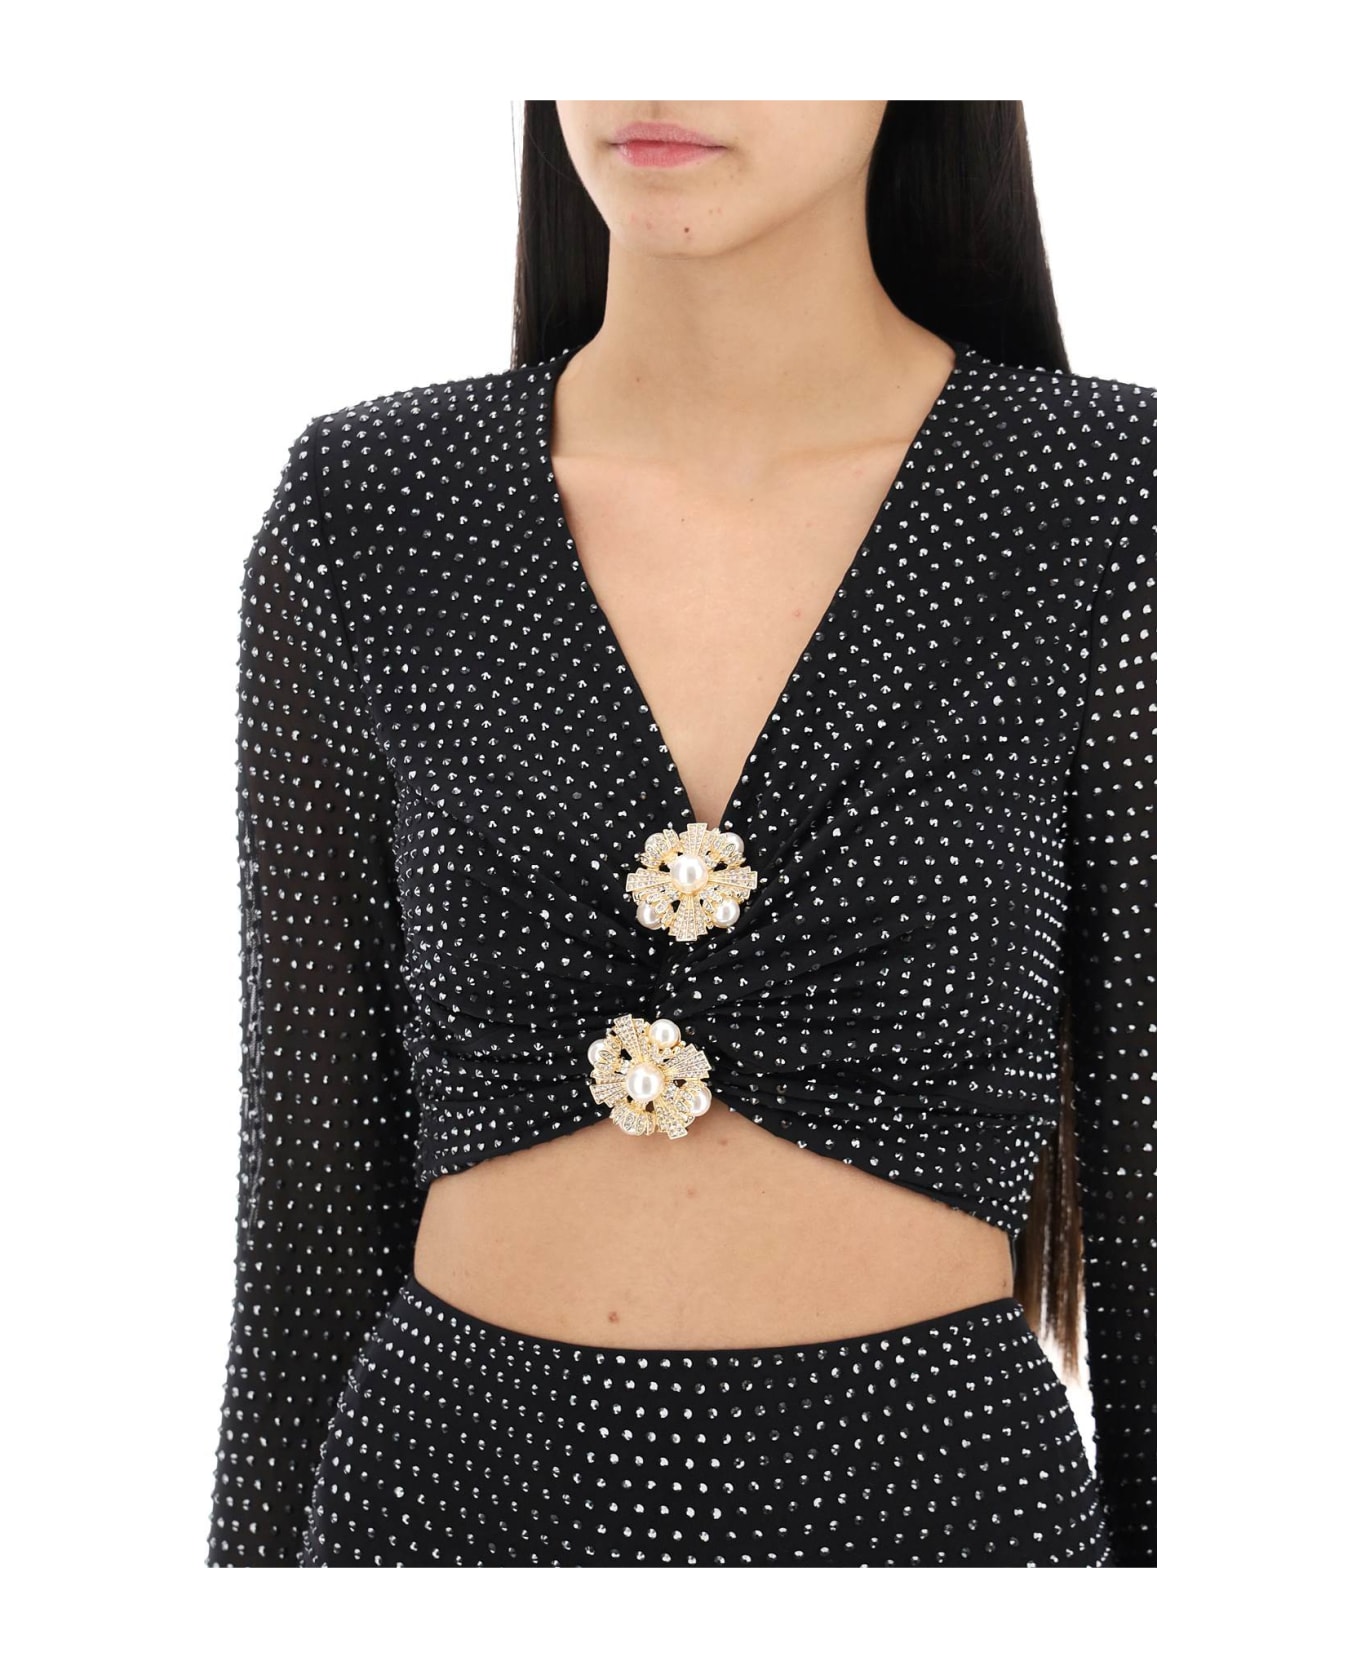 self-portrait Rhinestone-studded Cropped Top With Diamanté Brooches - BLACK (Black)